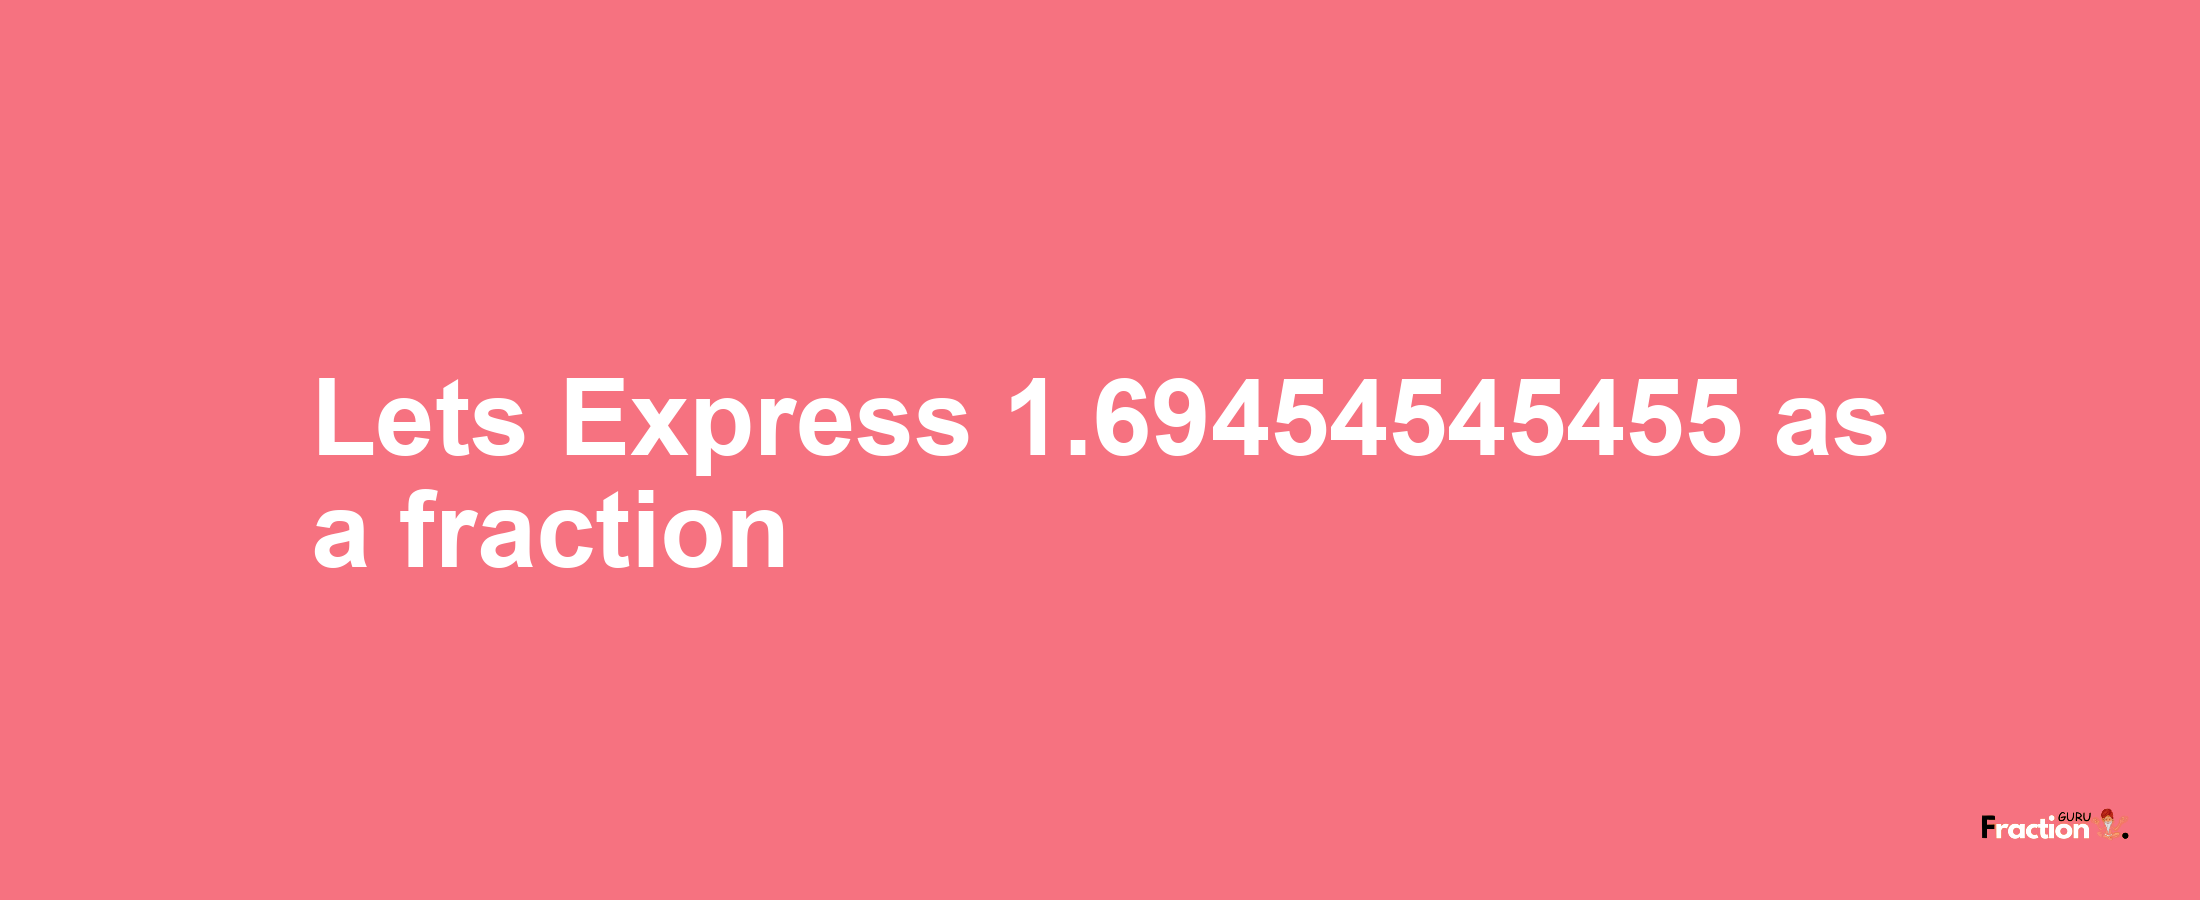 Lets Express 1.69454545455 as afraction